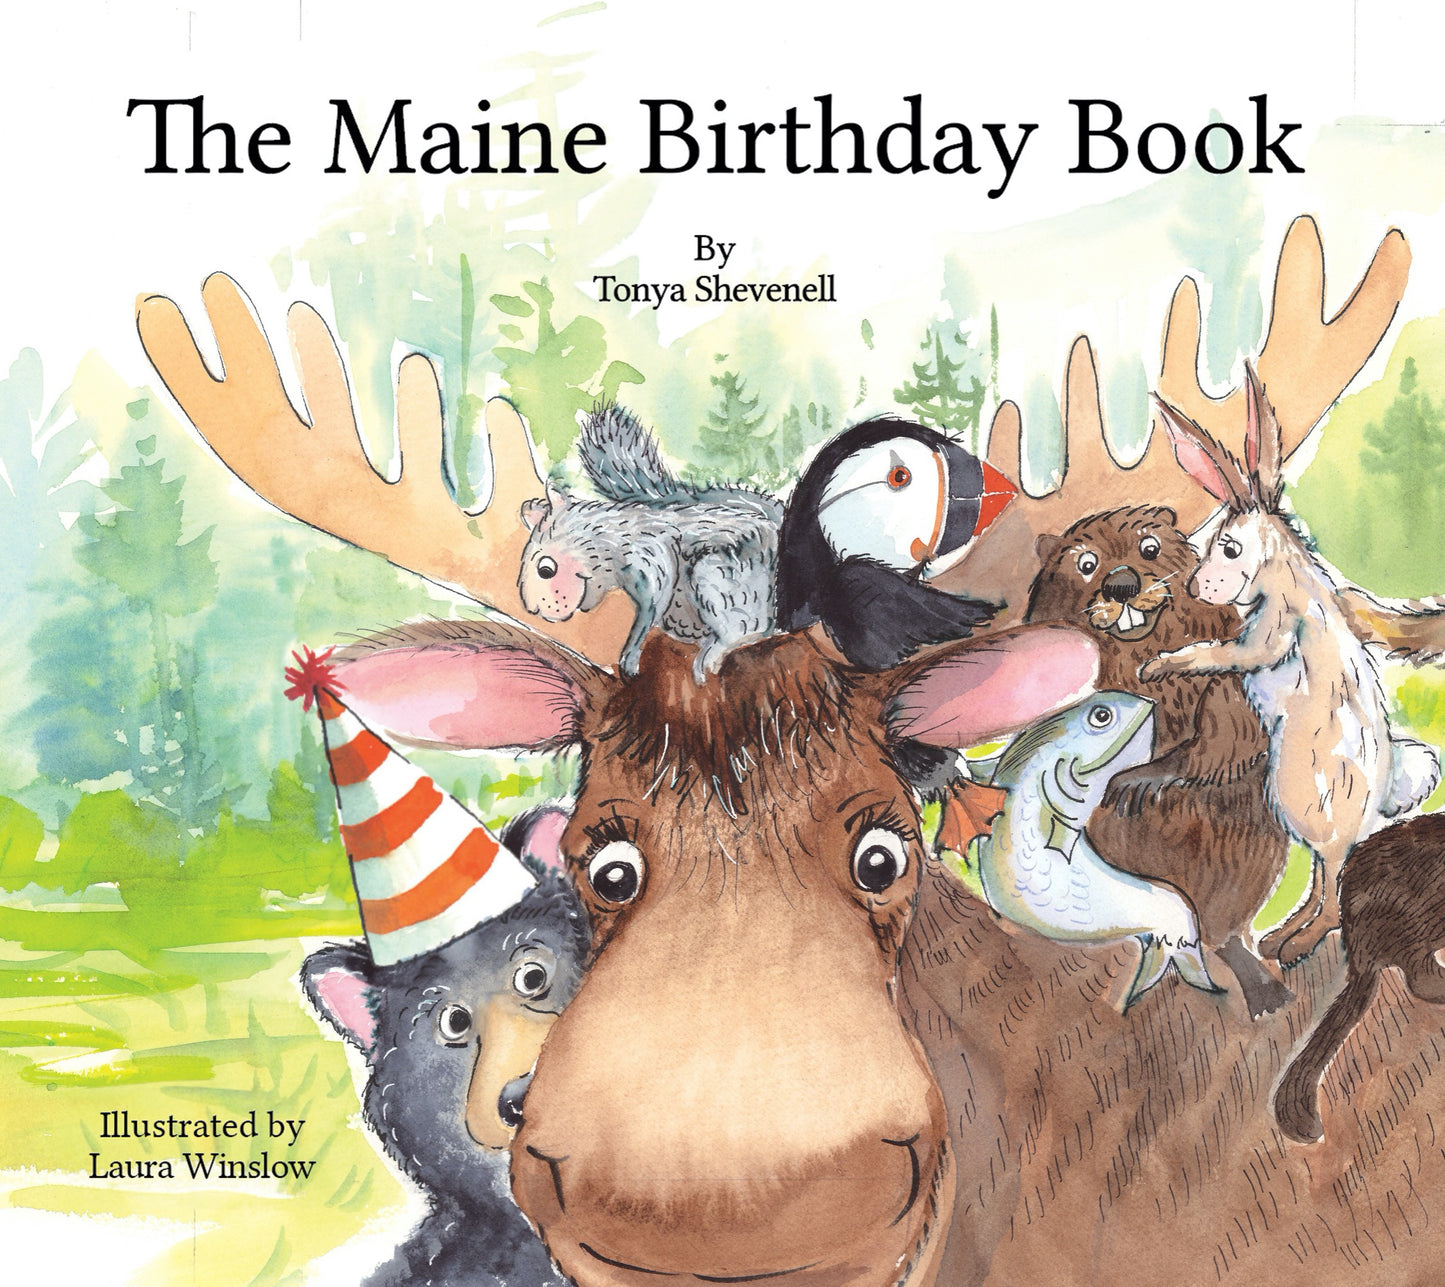 SPECIAL PRICE: A 4-Book Bundle of The Maine Birthday Book